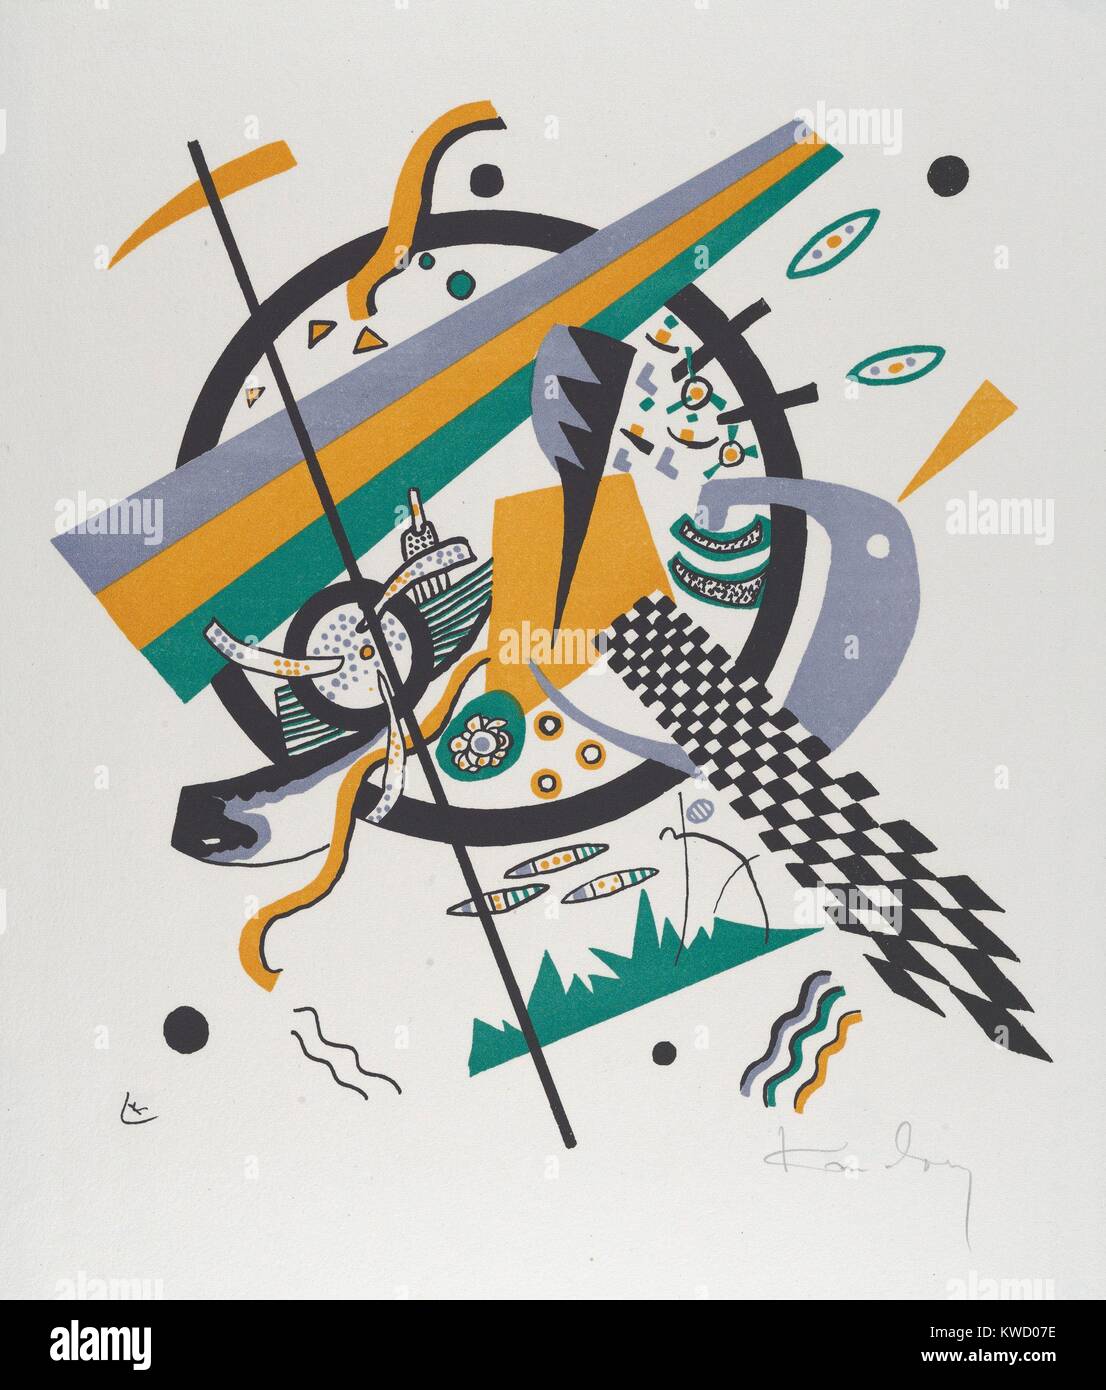 Kleine Welten III (Small Worlds IV), by Vasily Kandinsky, 1922, Russian German Expressionist print. Straight edged and sinuous flat shapes of color, circles, and hand drawn forms and an inclined checkerboard contribute to complexity on this abstract litho (BSLOC 2017 5 147) Stock Photo